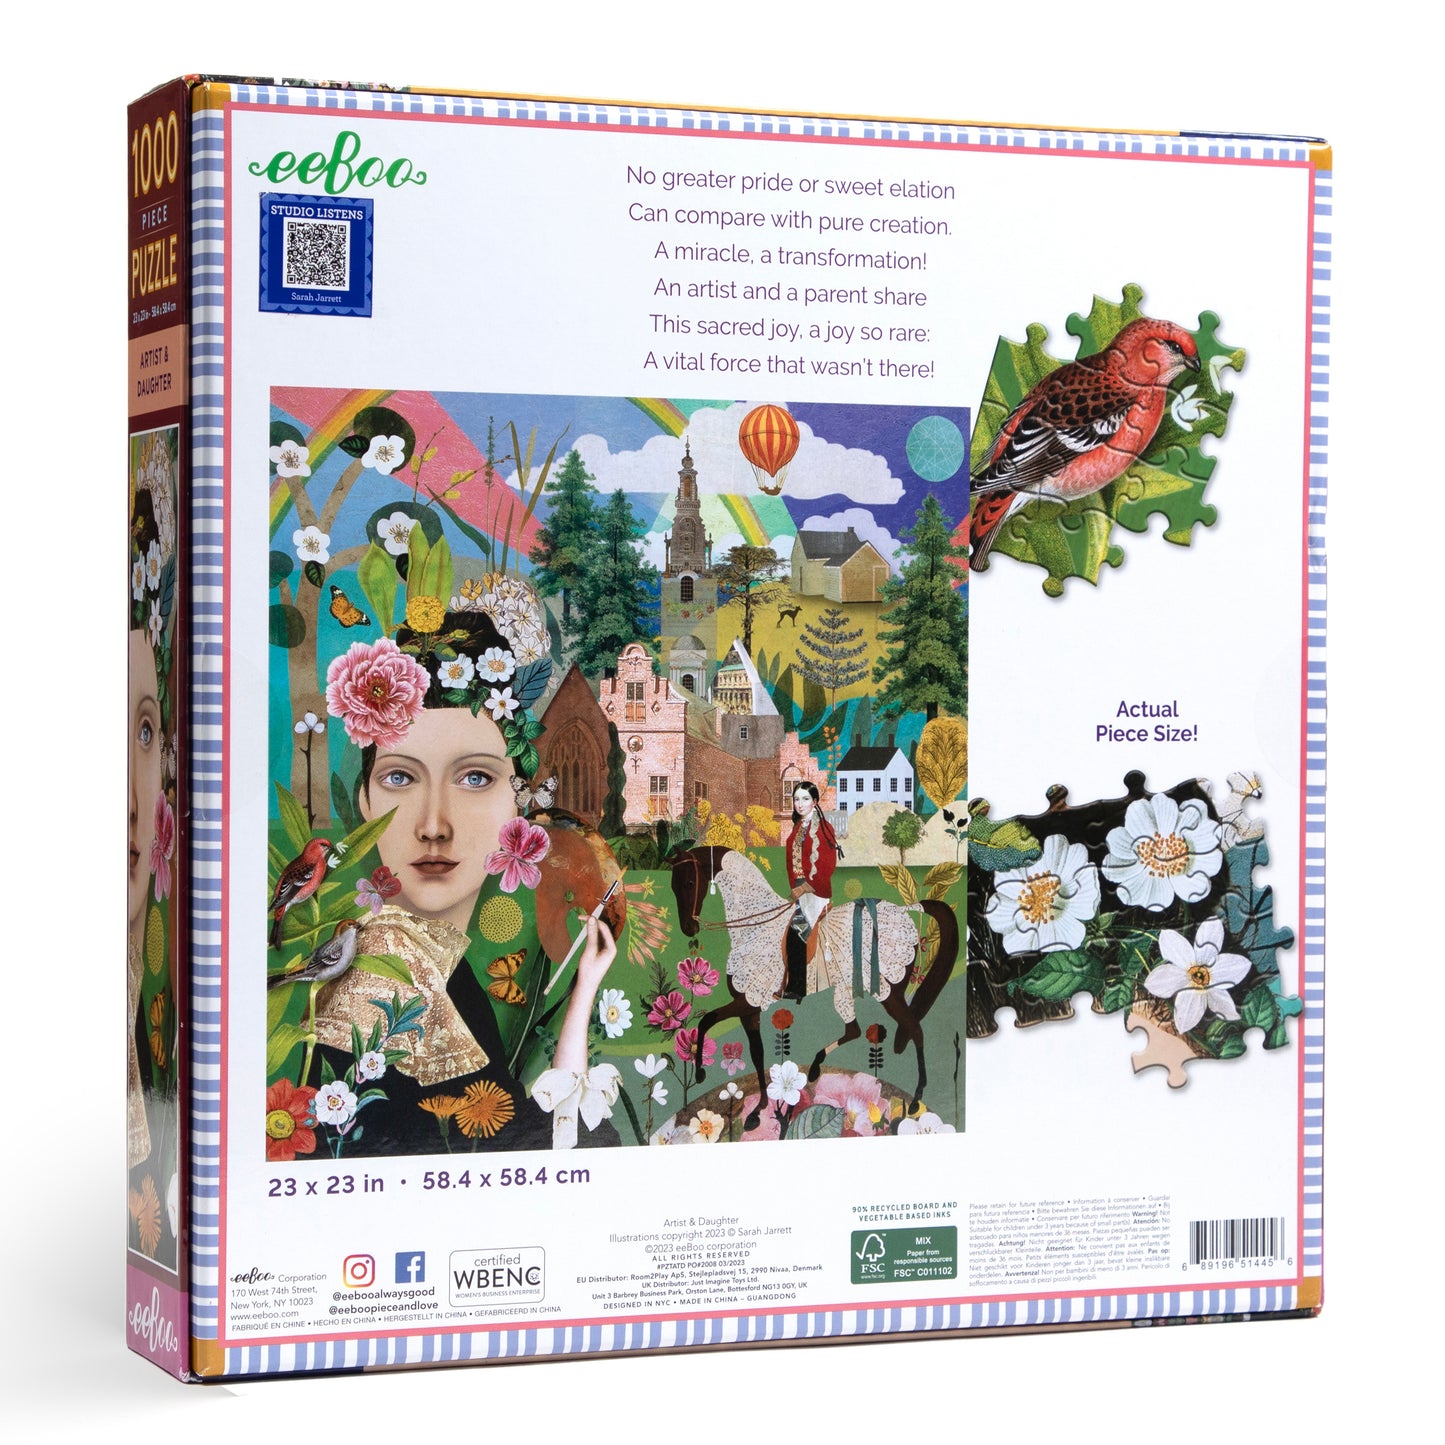 Artist & Daughter 1000 Piece Jigsaw Puzzle | eeBoo Piece & Love Unique Gifts for Women